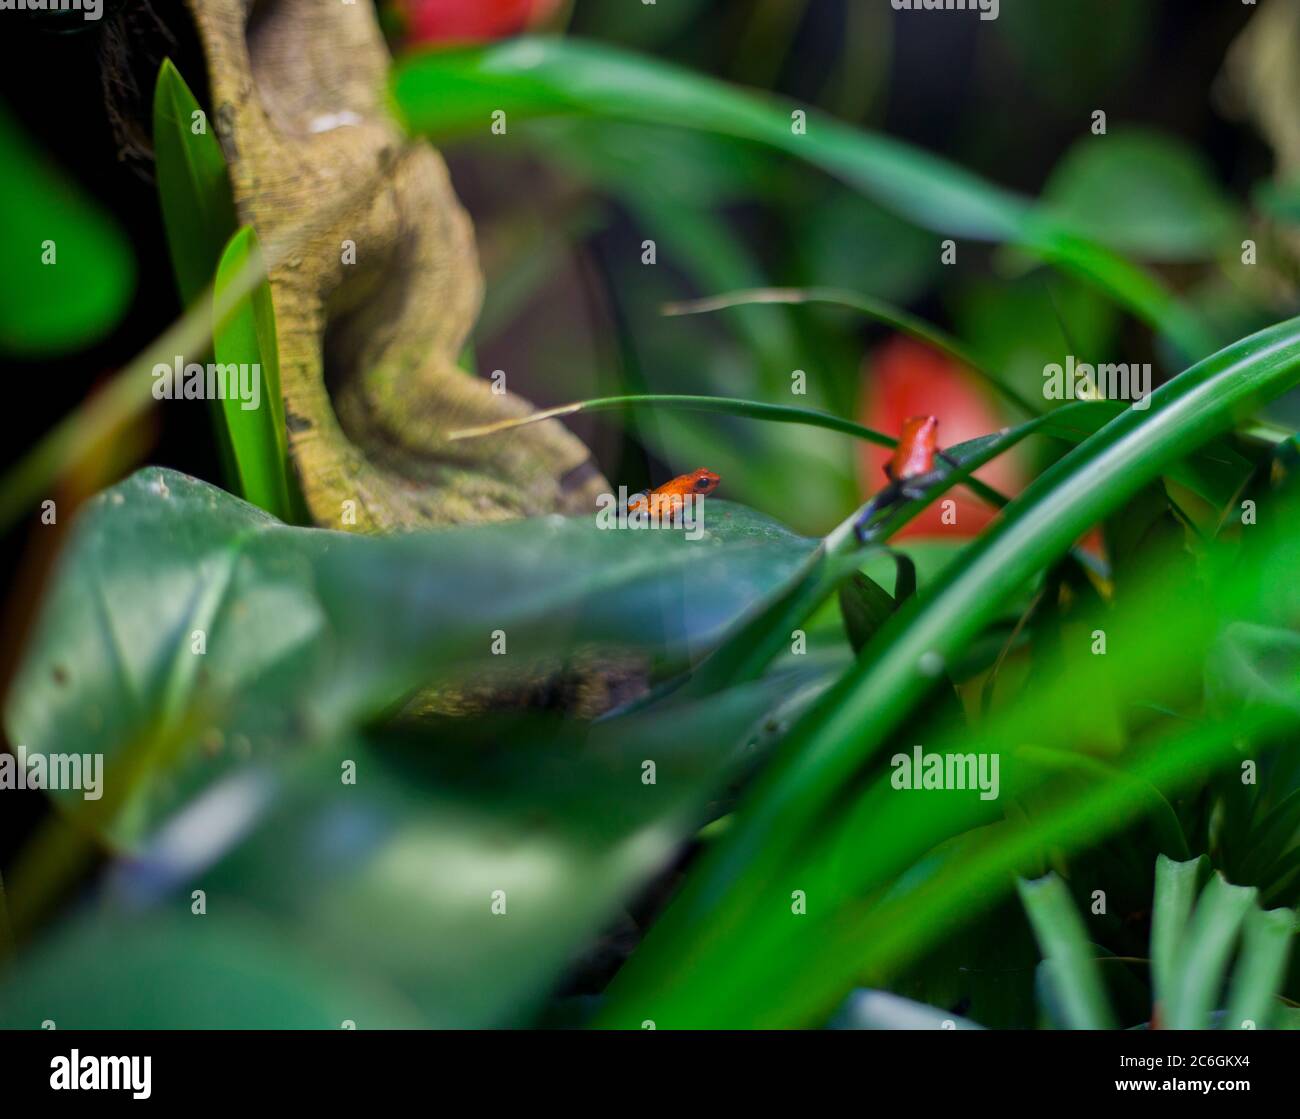 Tiny frog,  Ranitomeya, poison dart frog, colourful frog, tropical frog, mini frog, poisonous, tiny but deadly, small but deadly, frog on plant, Stock Photo